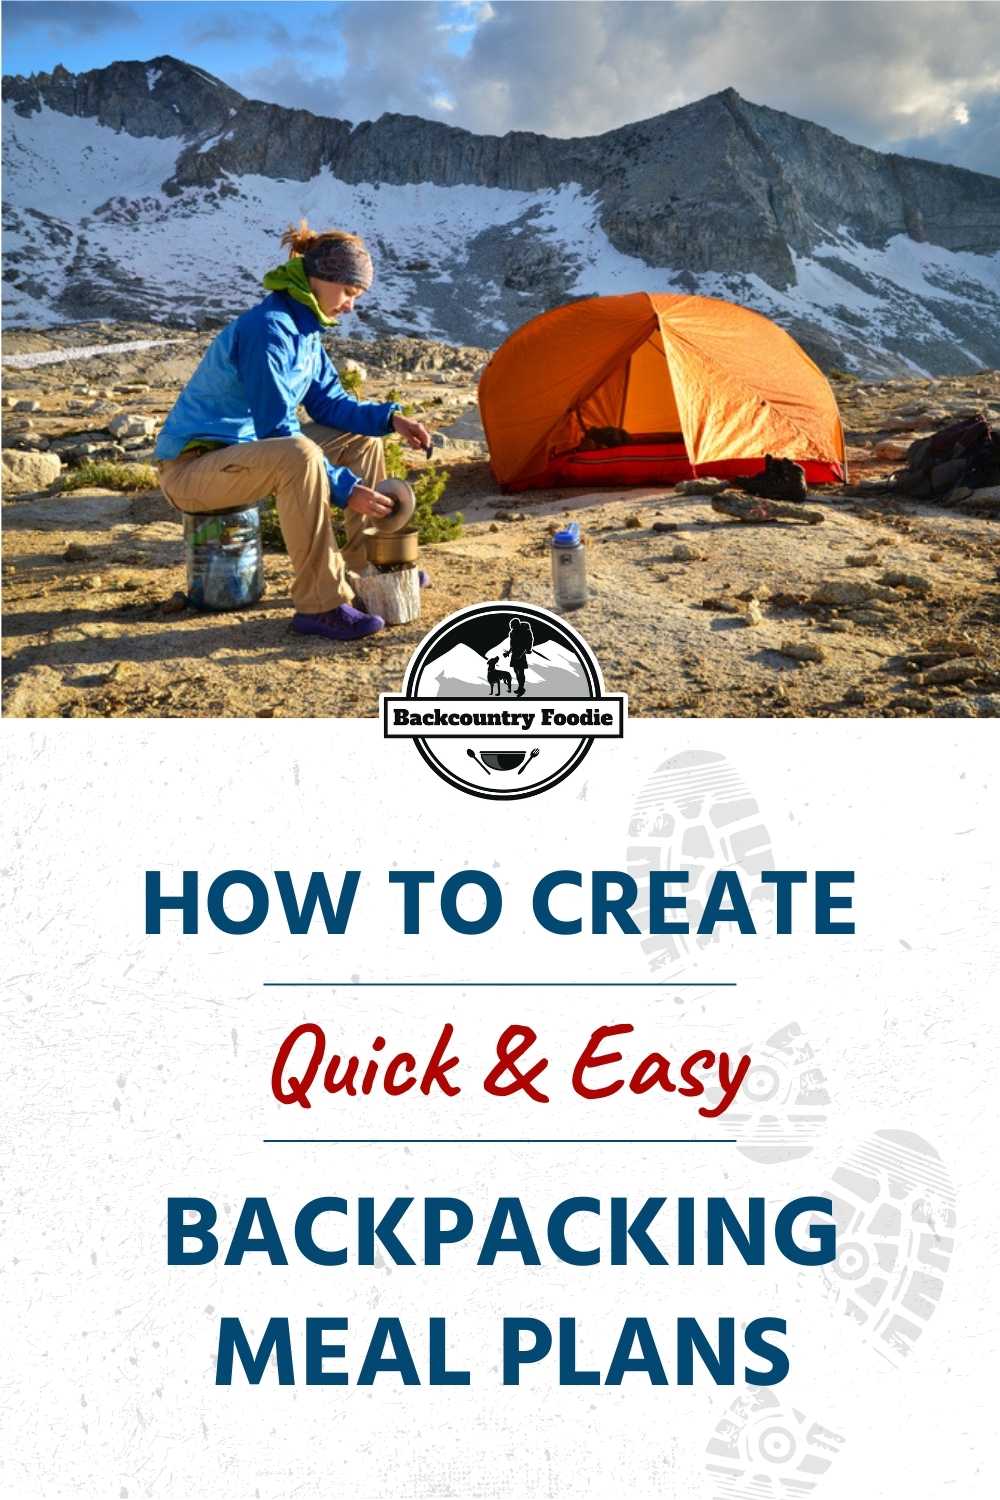 Meal planning for any backpacking trip can be a daunting task. Thru-hikers, especially, face the added challenge of planning backpacking food for an extended time and resupplying at unfamiliar grocery stores. Backcountry Foodie has the tools needed to relieve your anxiety. #bacpackingmealplans #thruhiking #backpackingmeals #backpackingresupply #whattoeatontrhuhike #backcountryfoodie